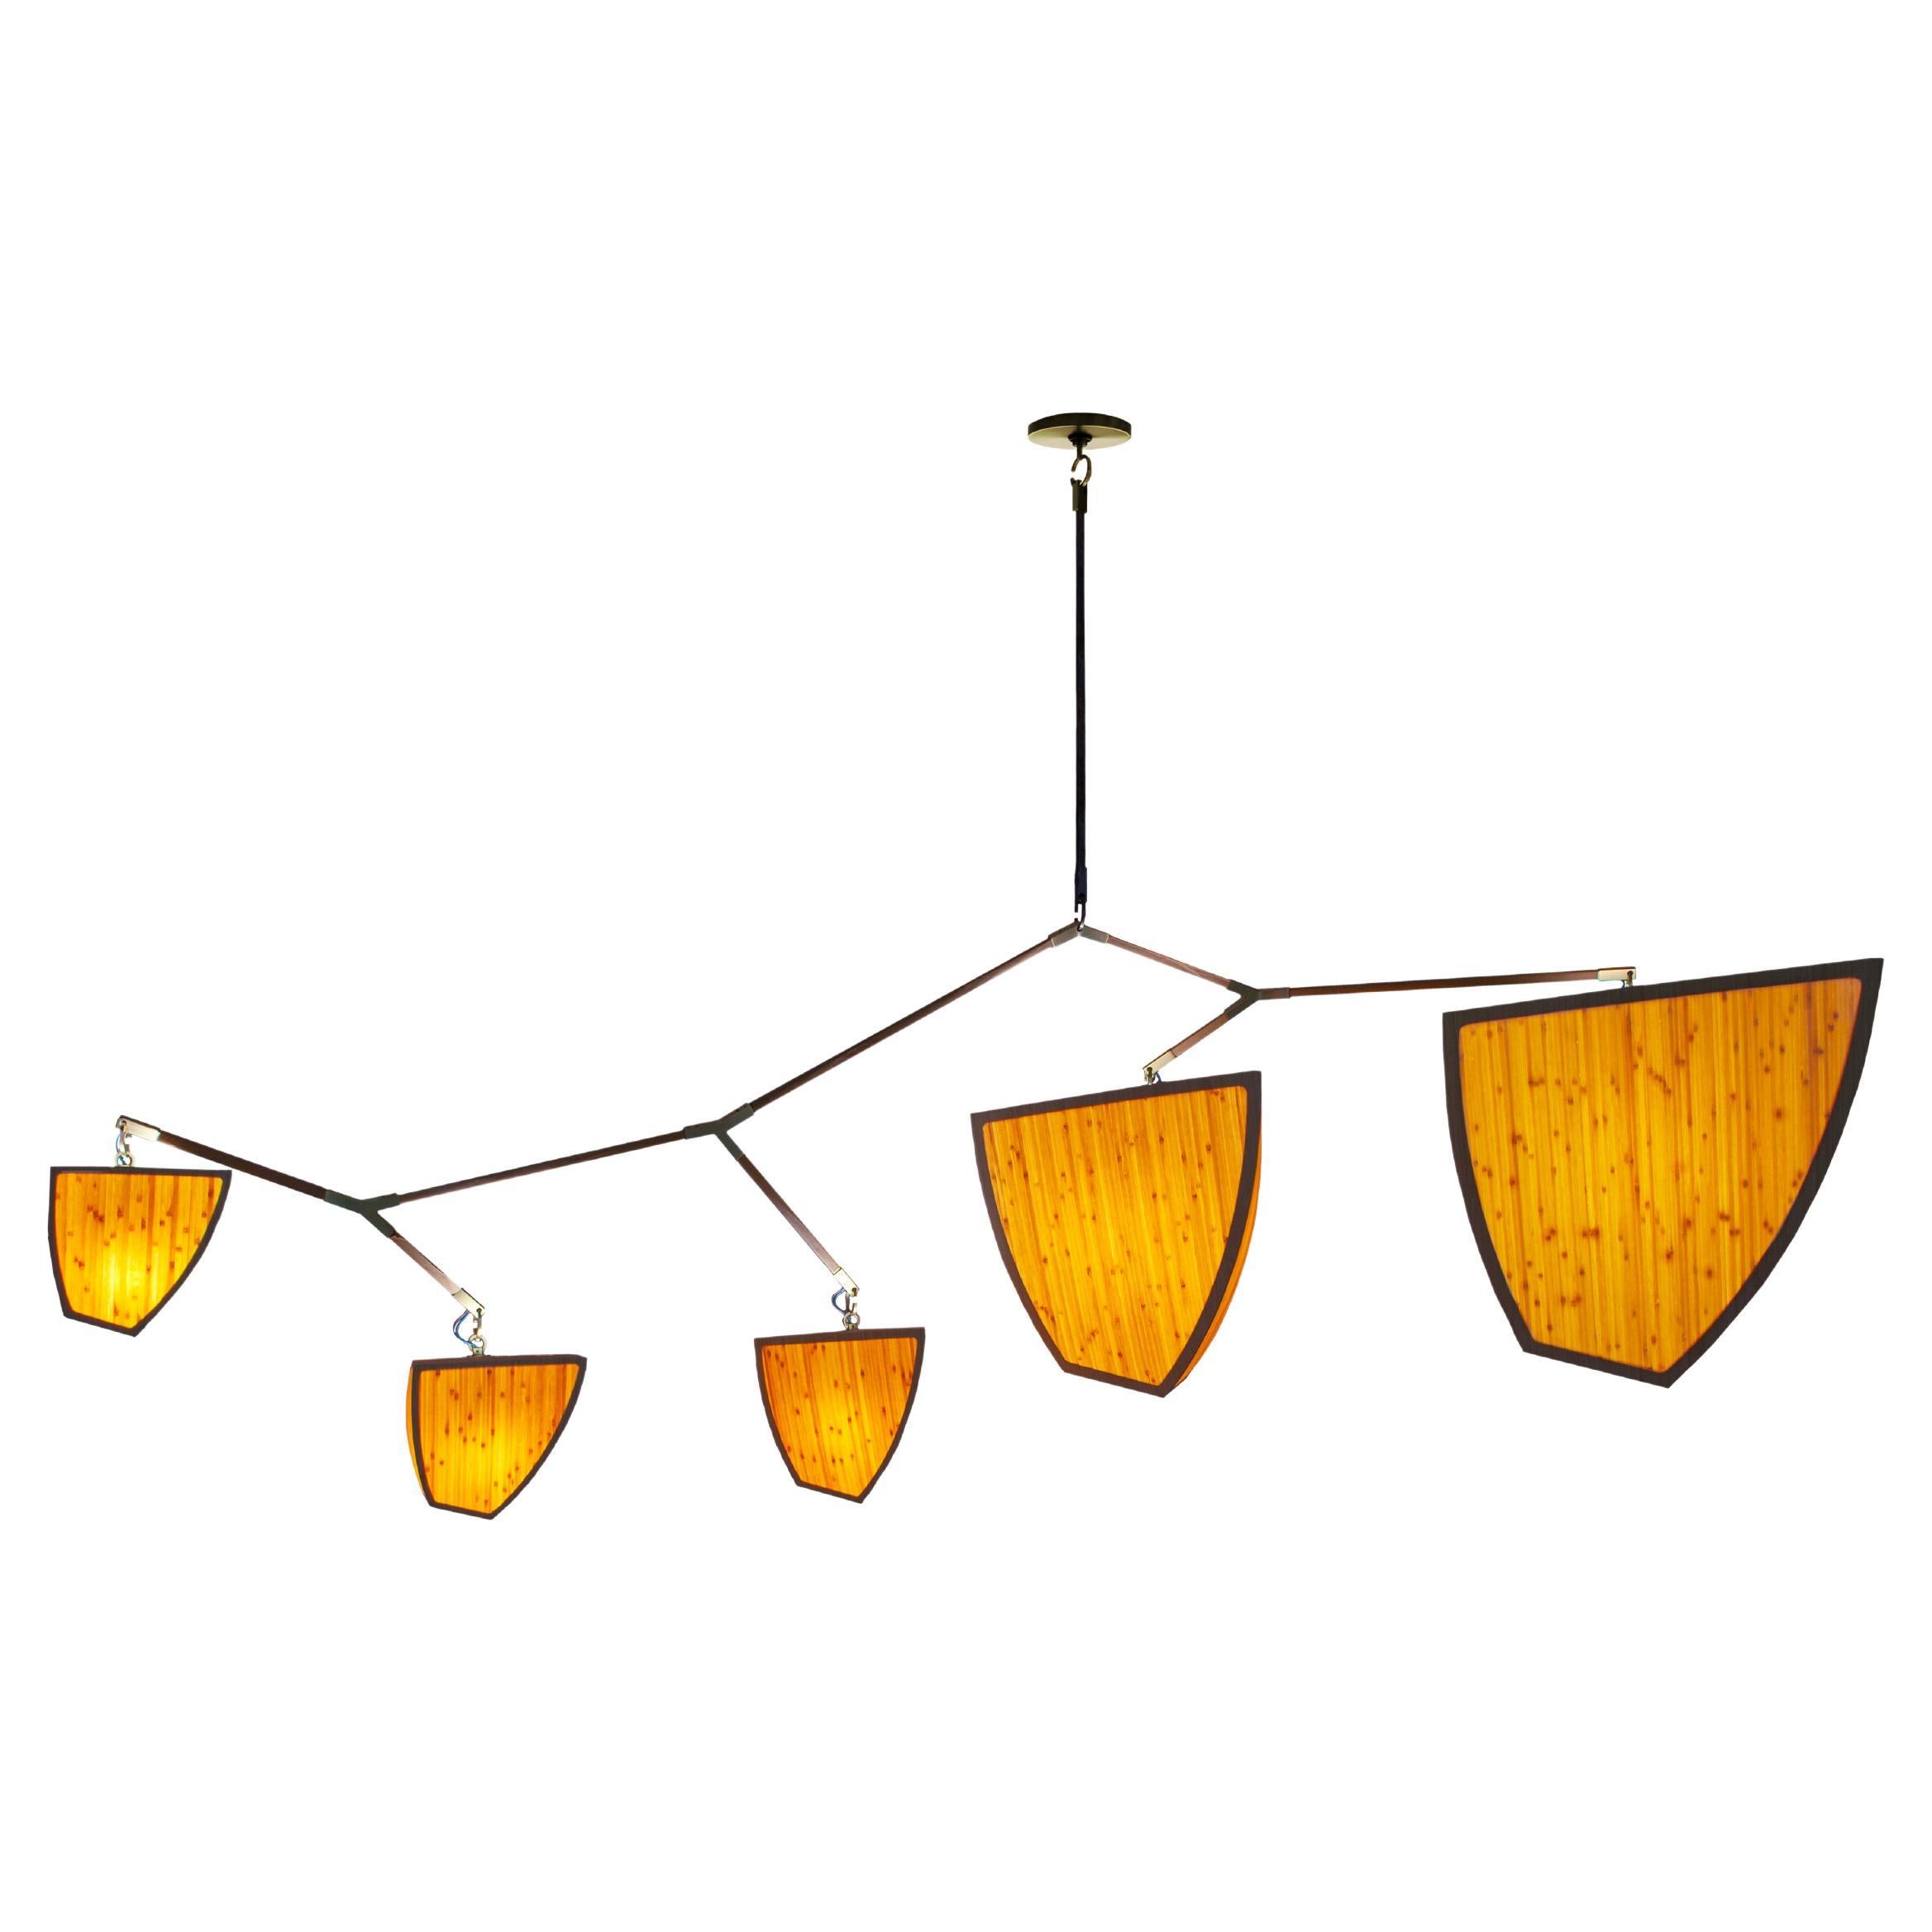 Bamboo Constantin 5: ABCFG Mobile Chandelier, handmade by Andrea Claire Studio